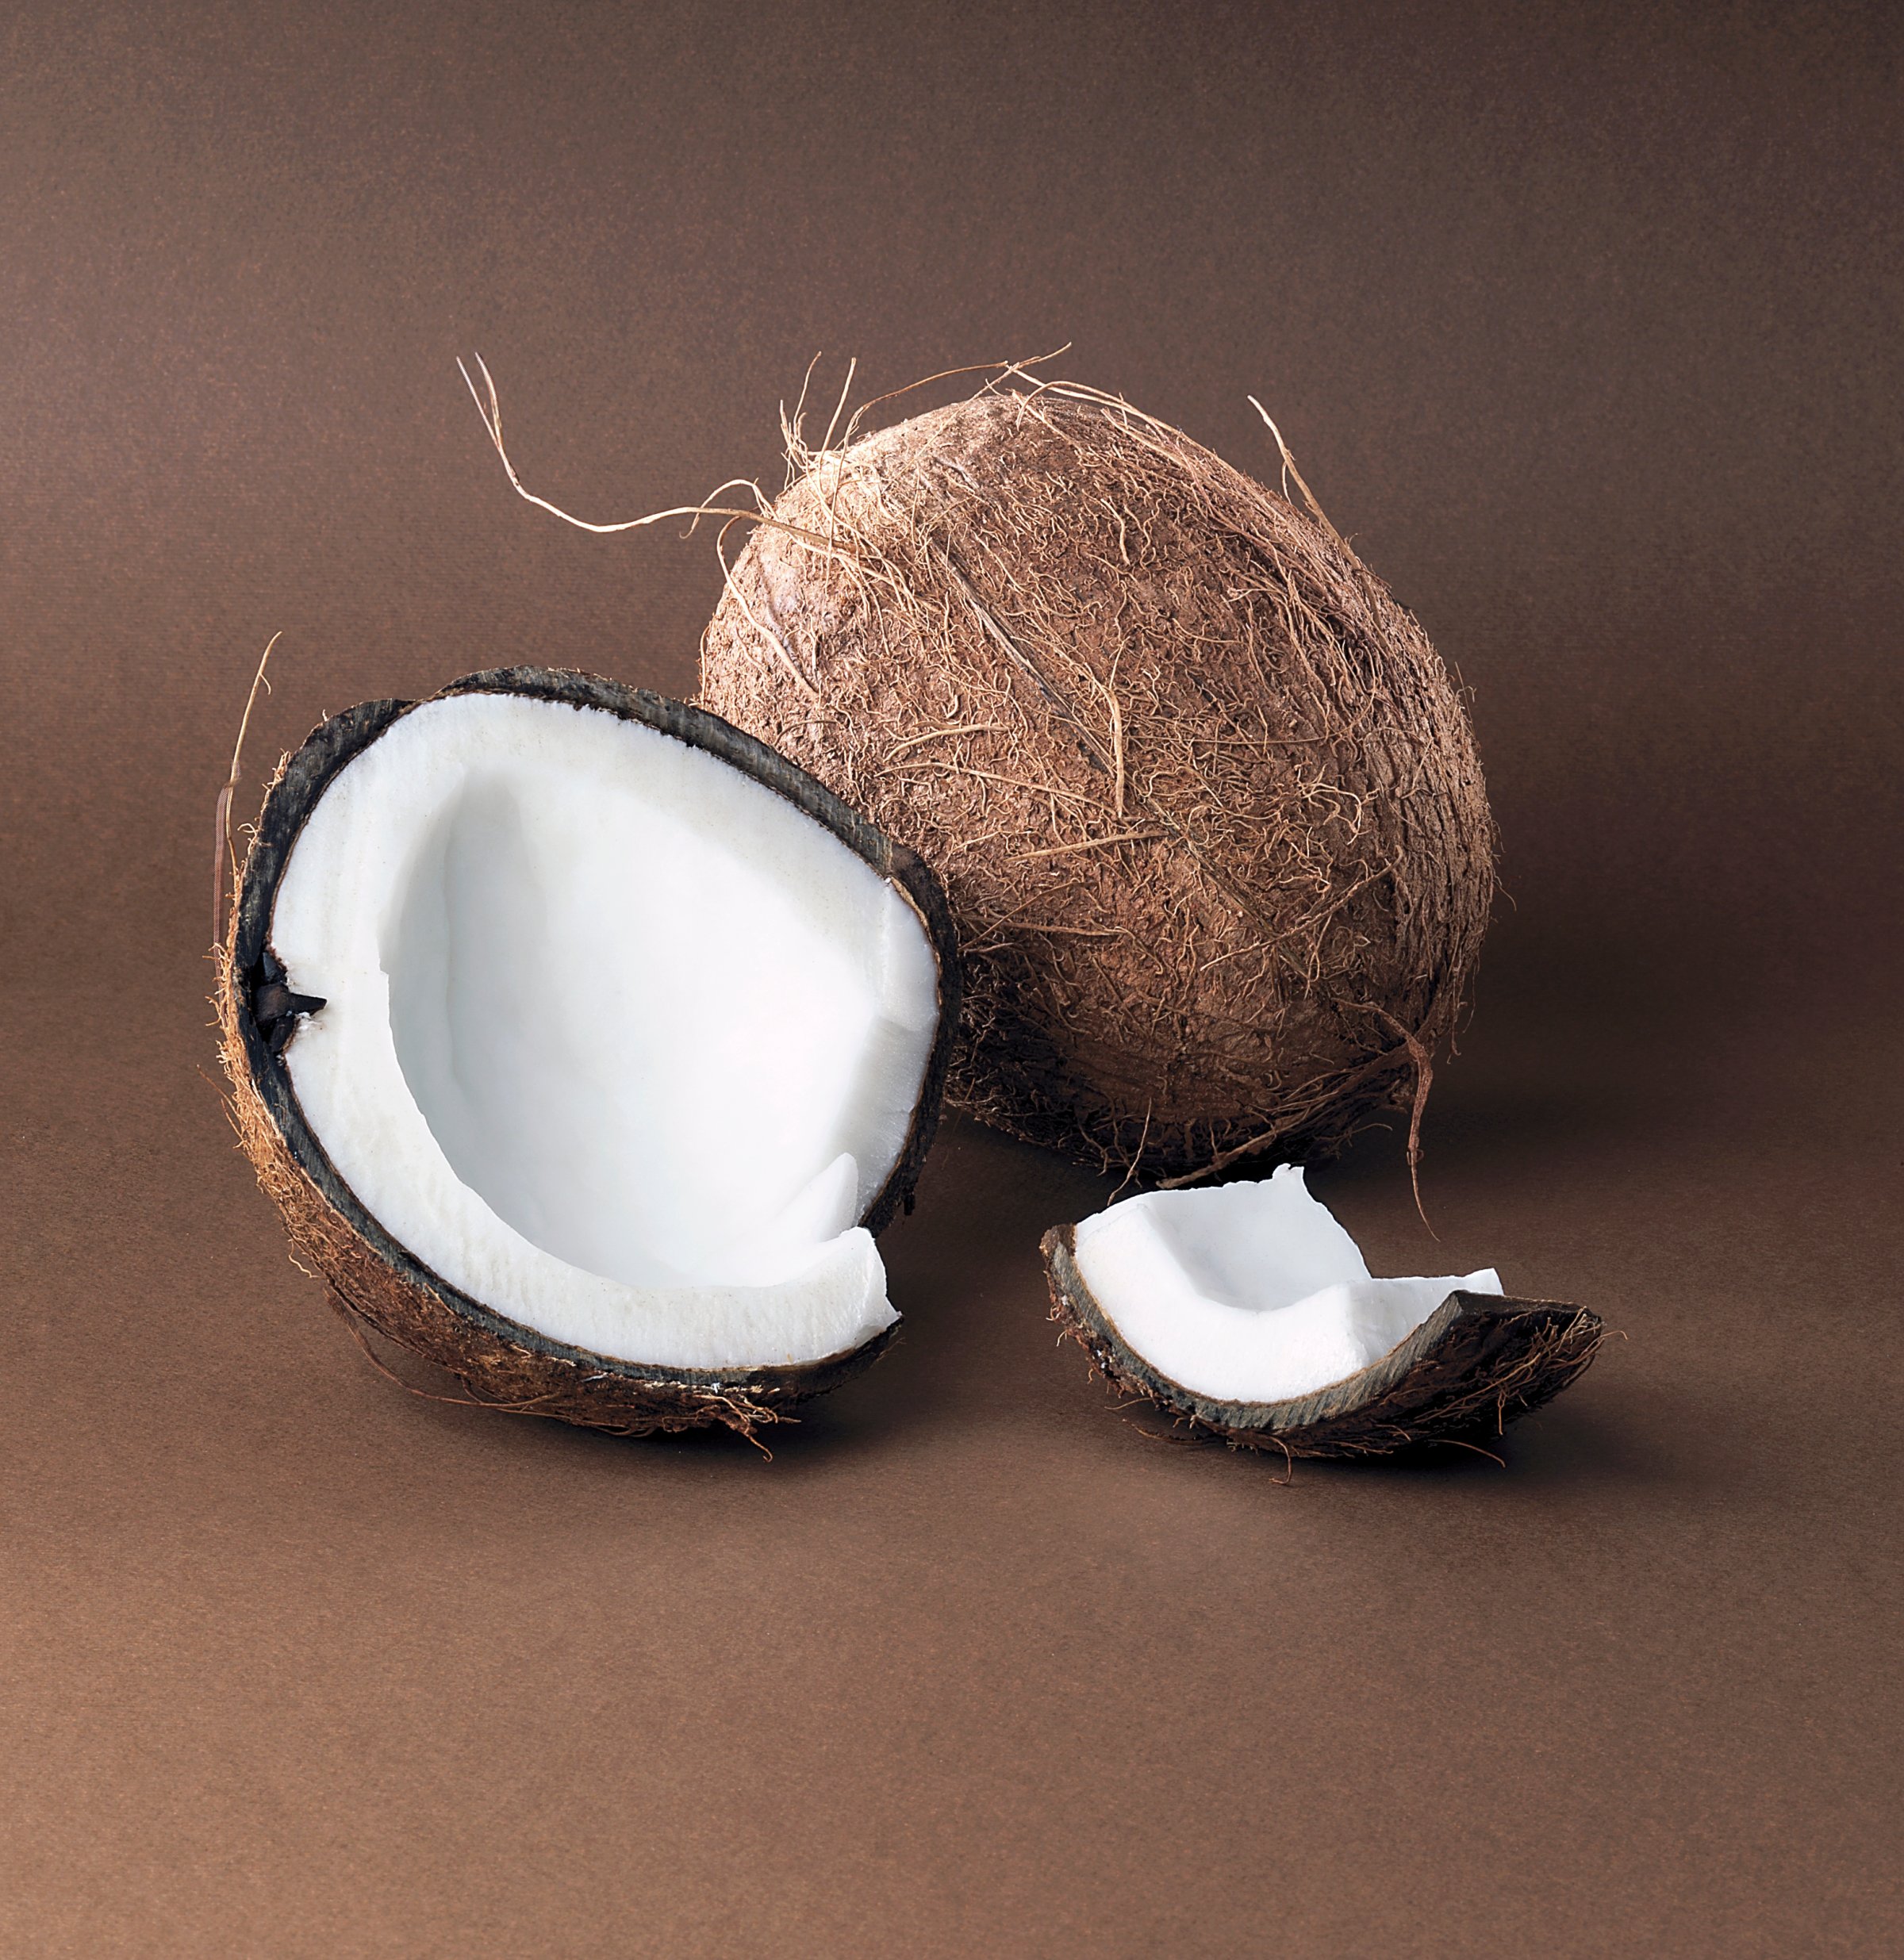 Whole and split coconut